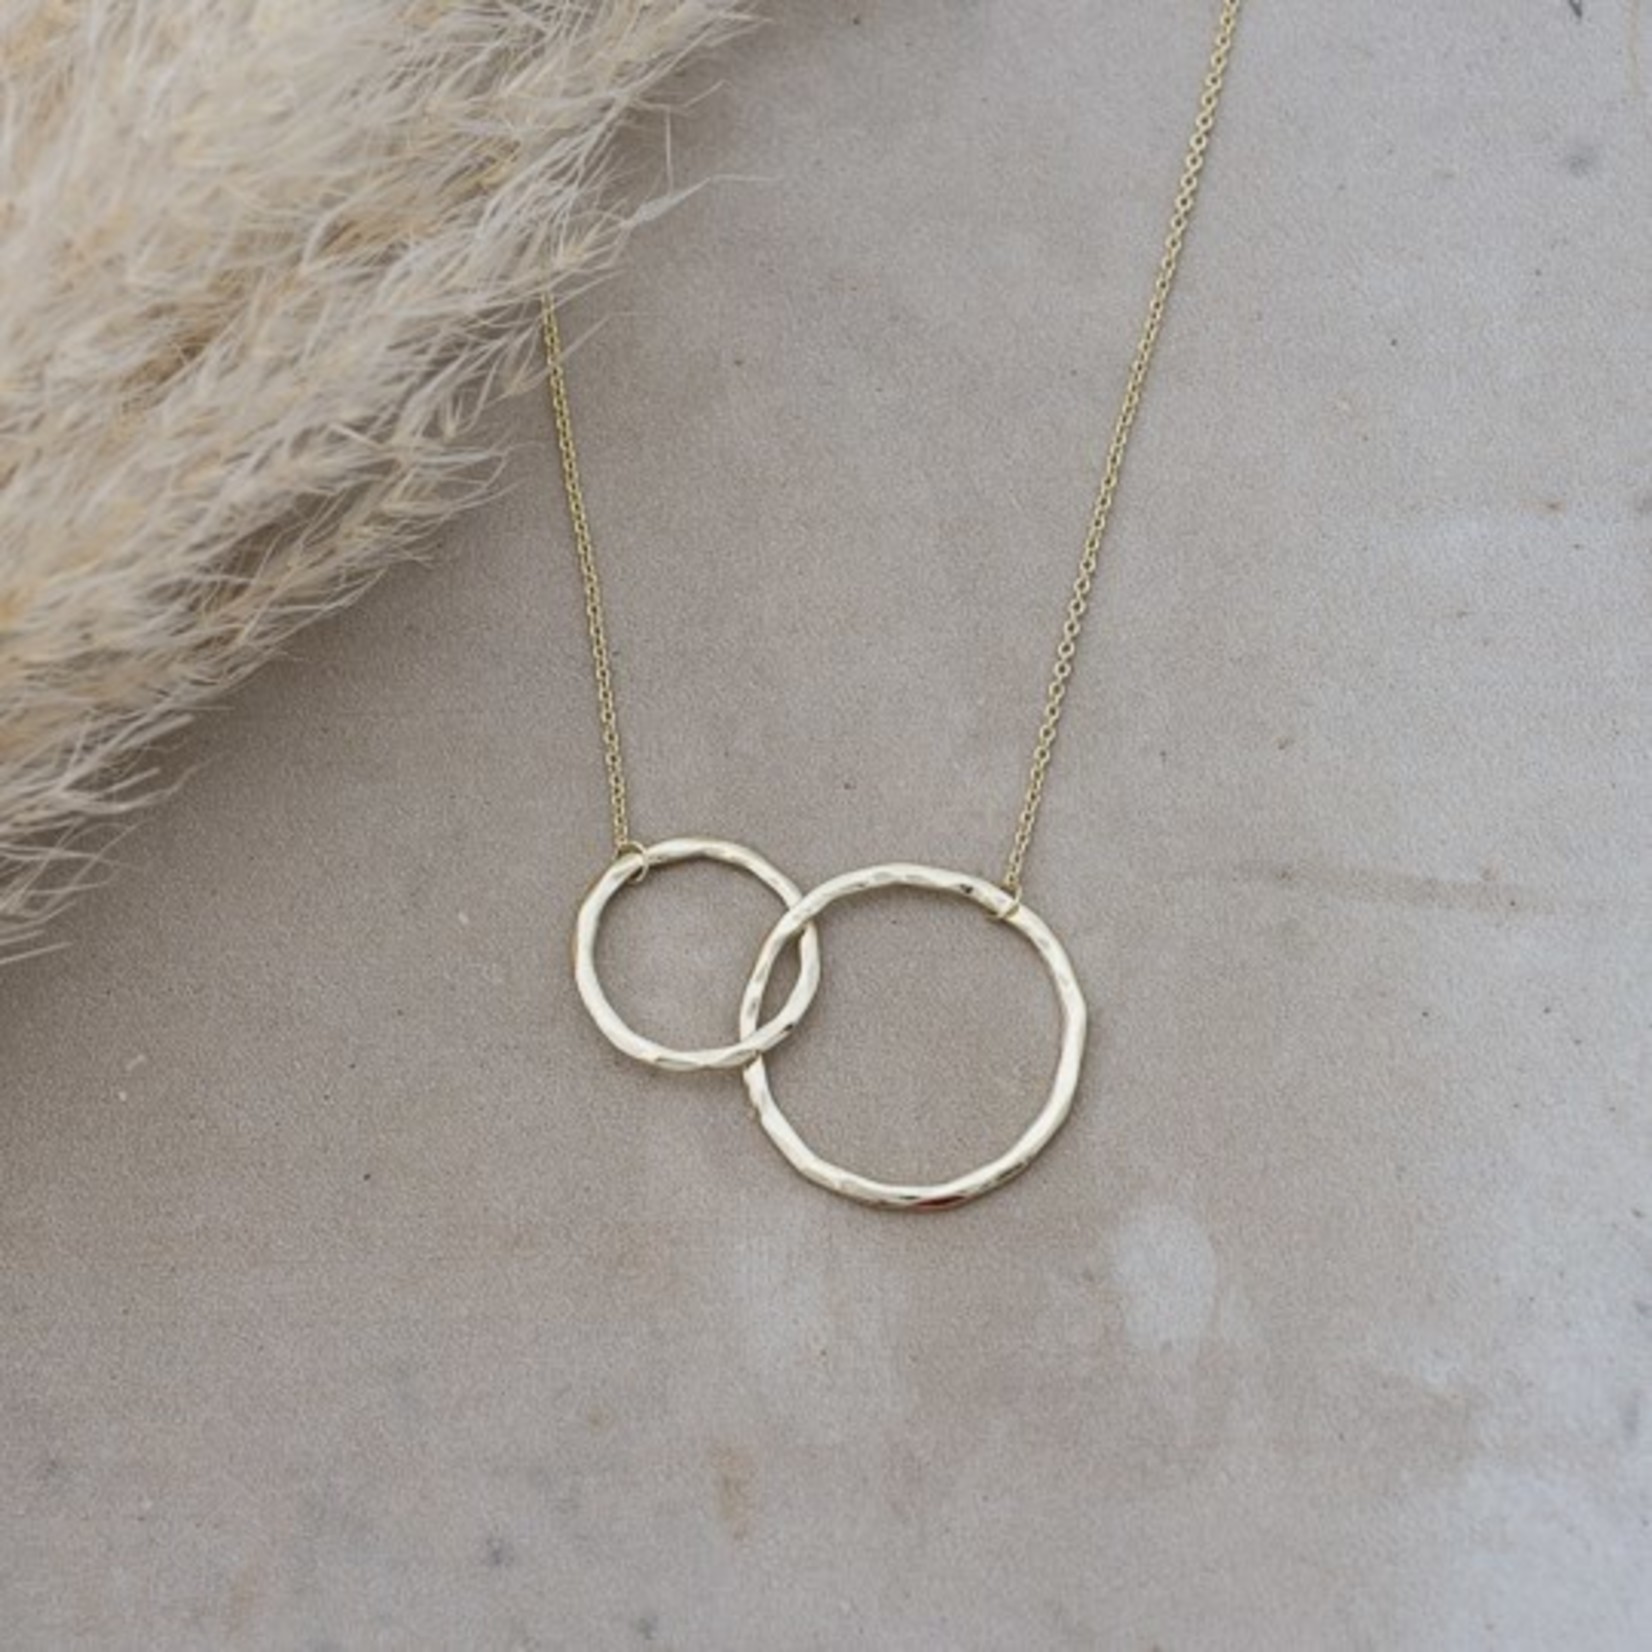 Glee Jewelry Sister Necklace